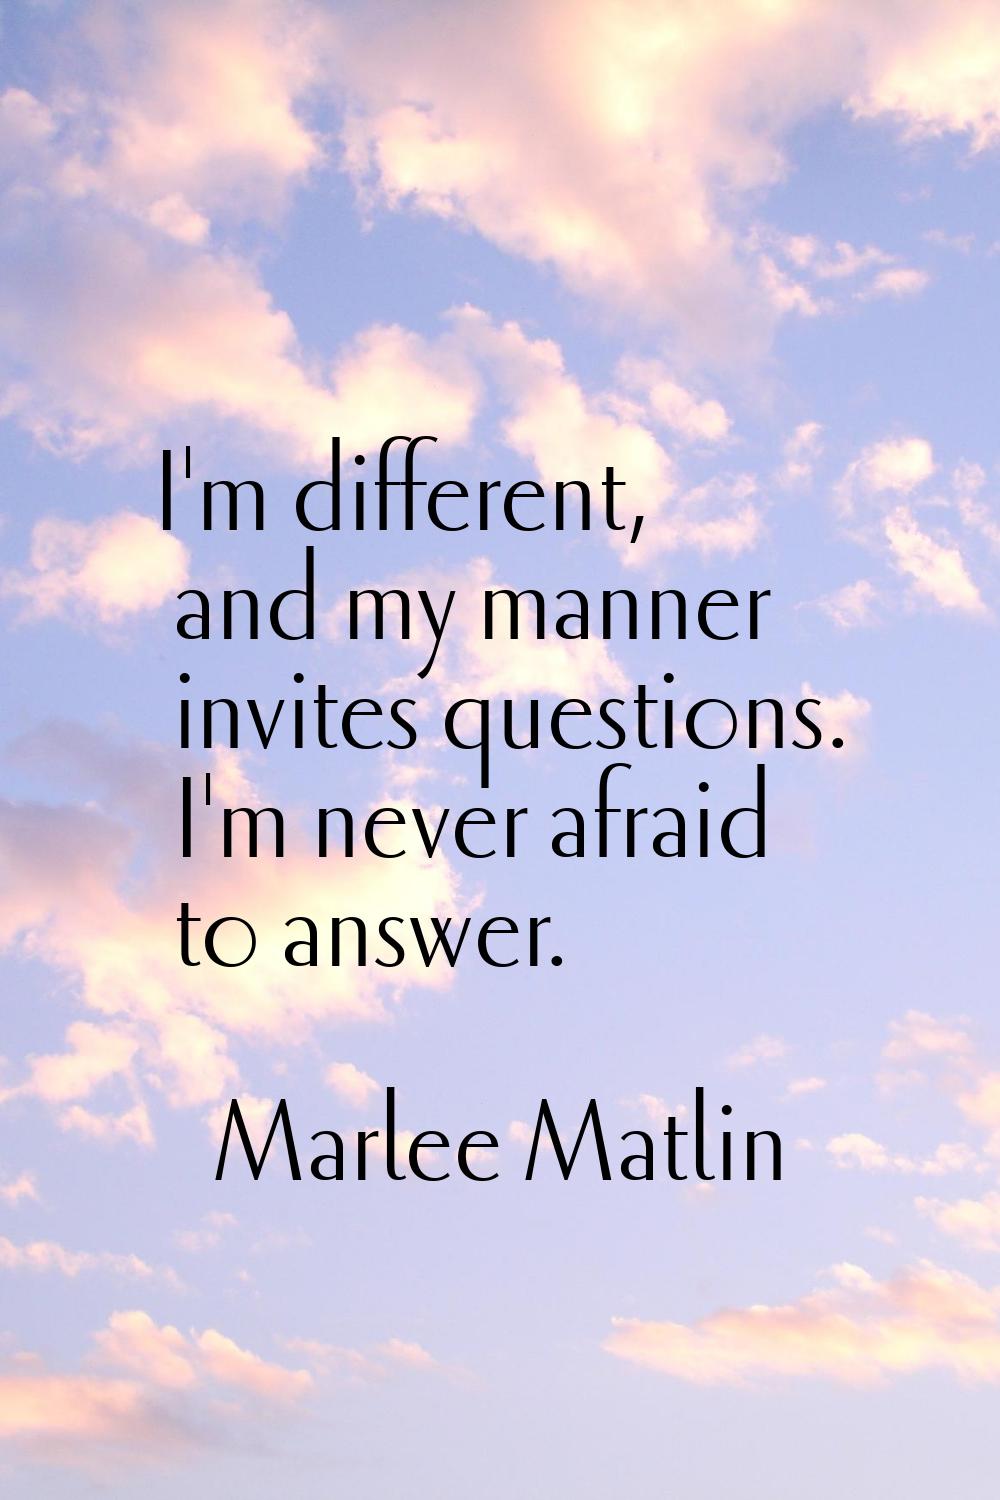 I'm different, and my manner invites questions. I'm never afraid to answer.